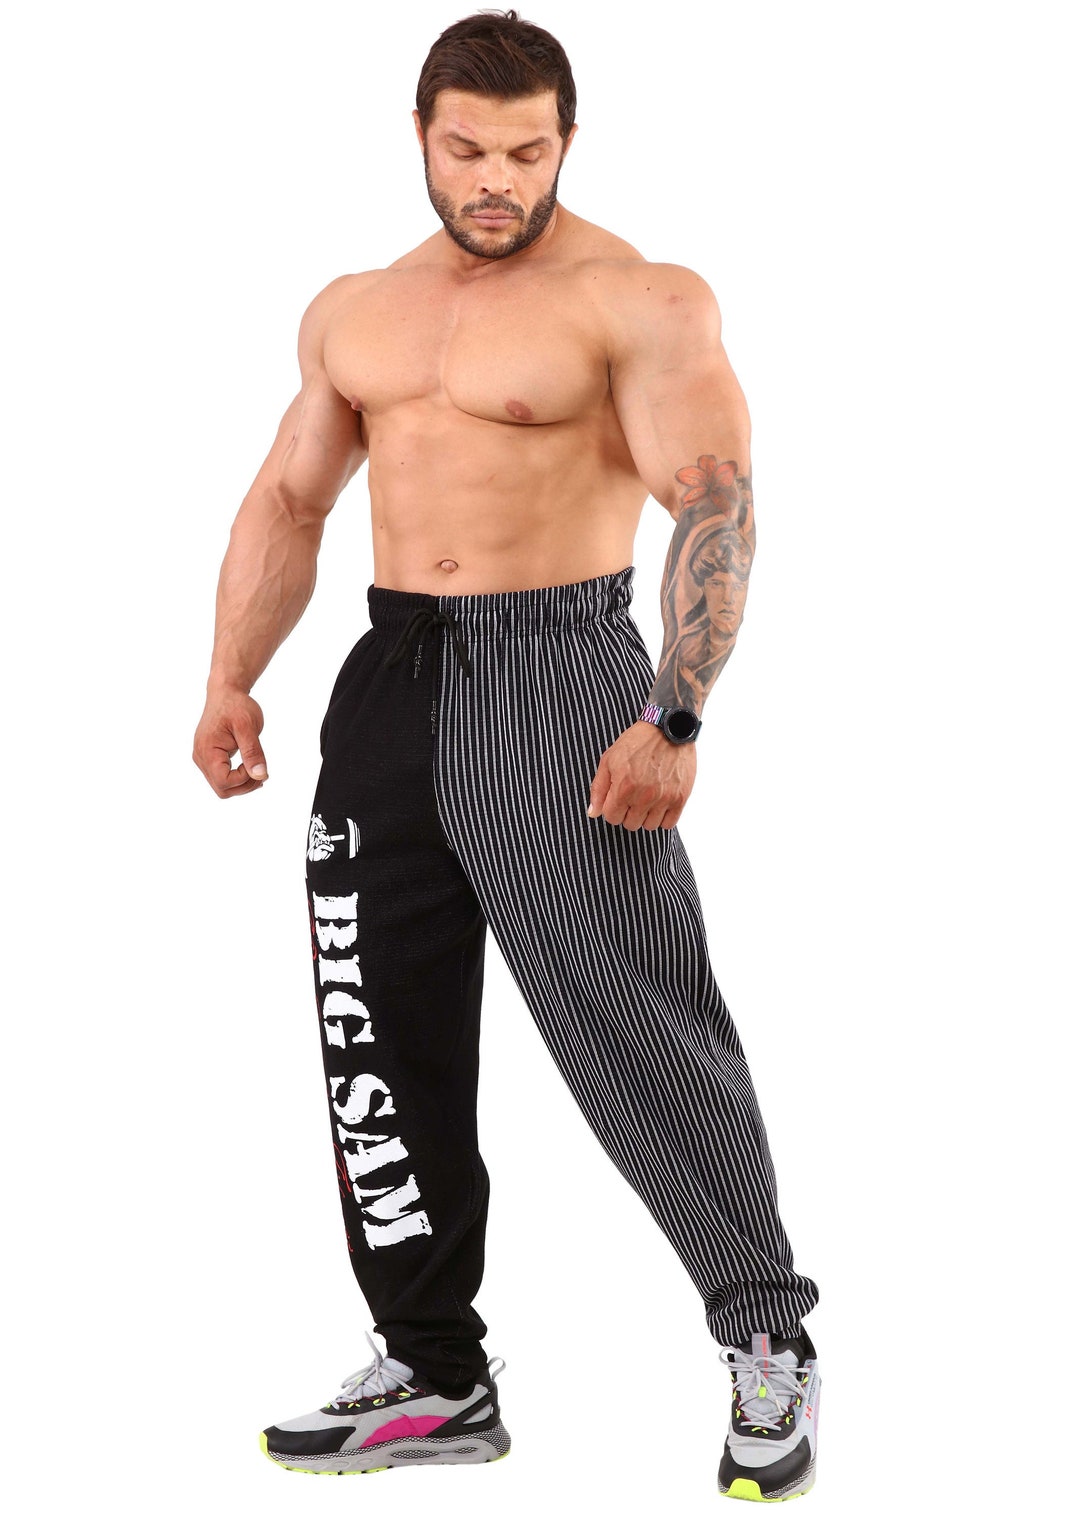 Buy Men's Baggy Sweatpants With Pockets, Oldschool Gym Muscle